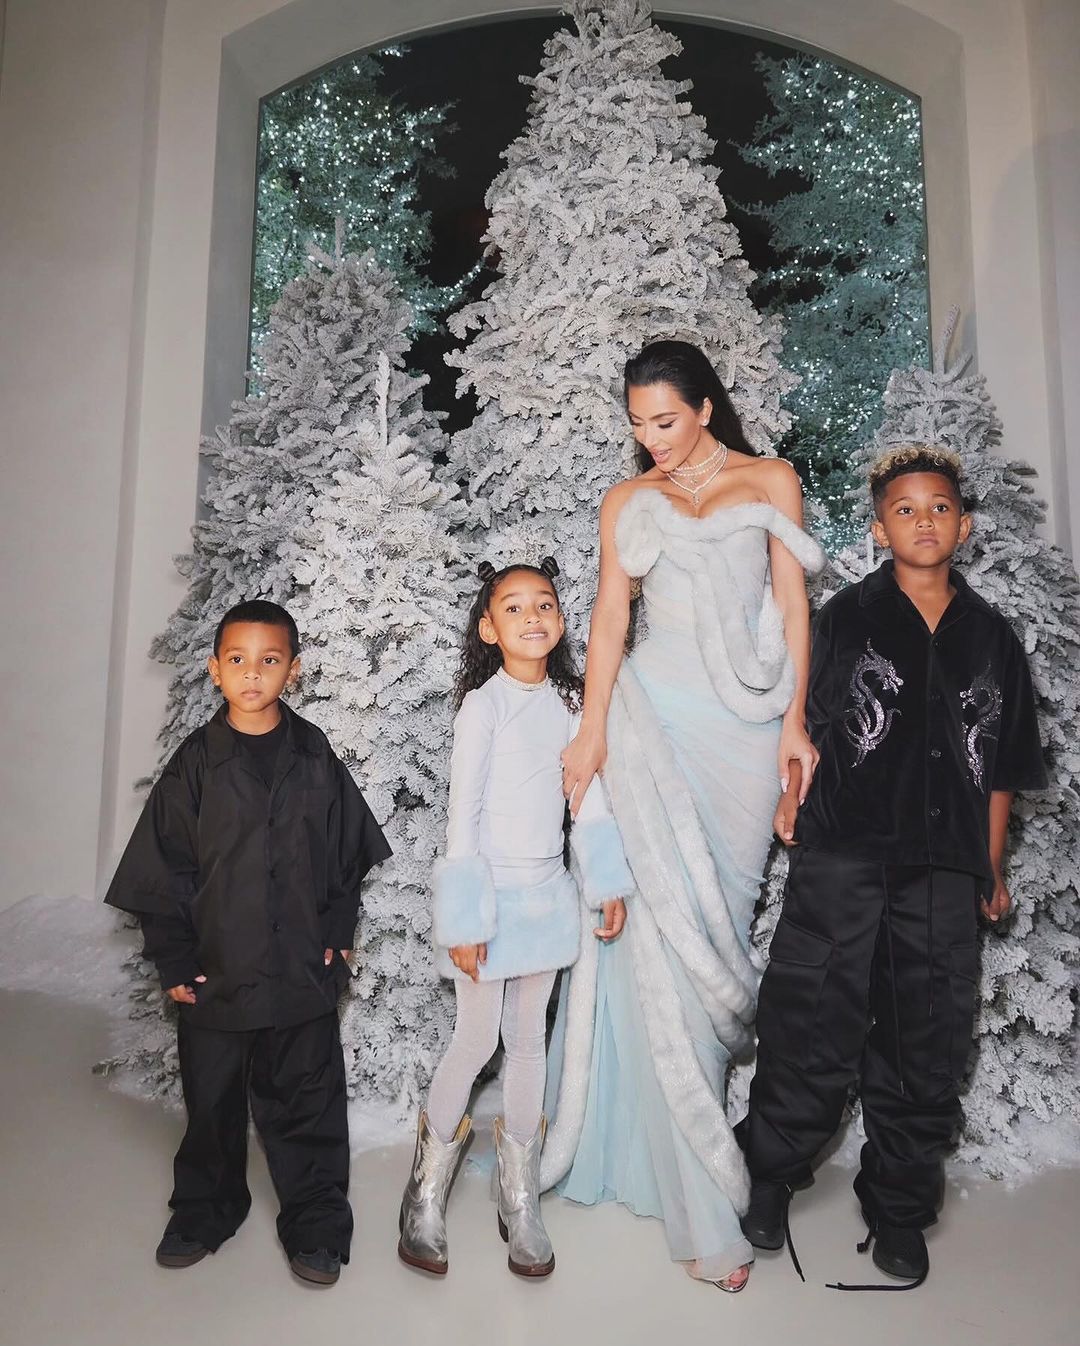 Kim Kardashian with children at the holiday party